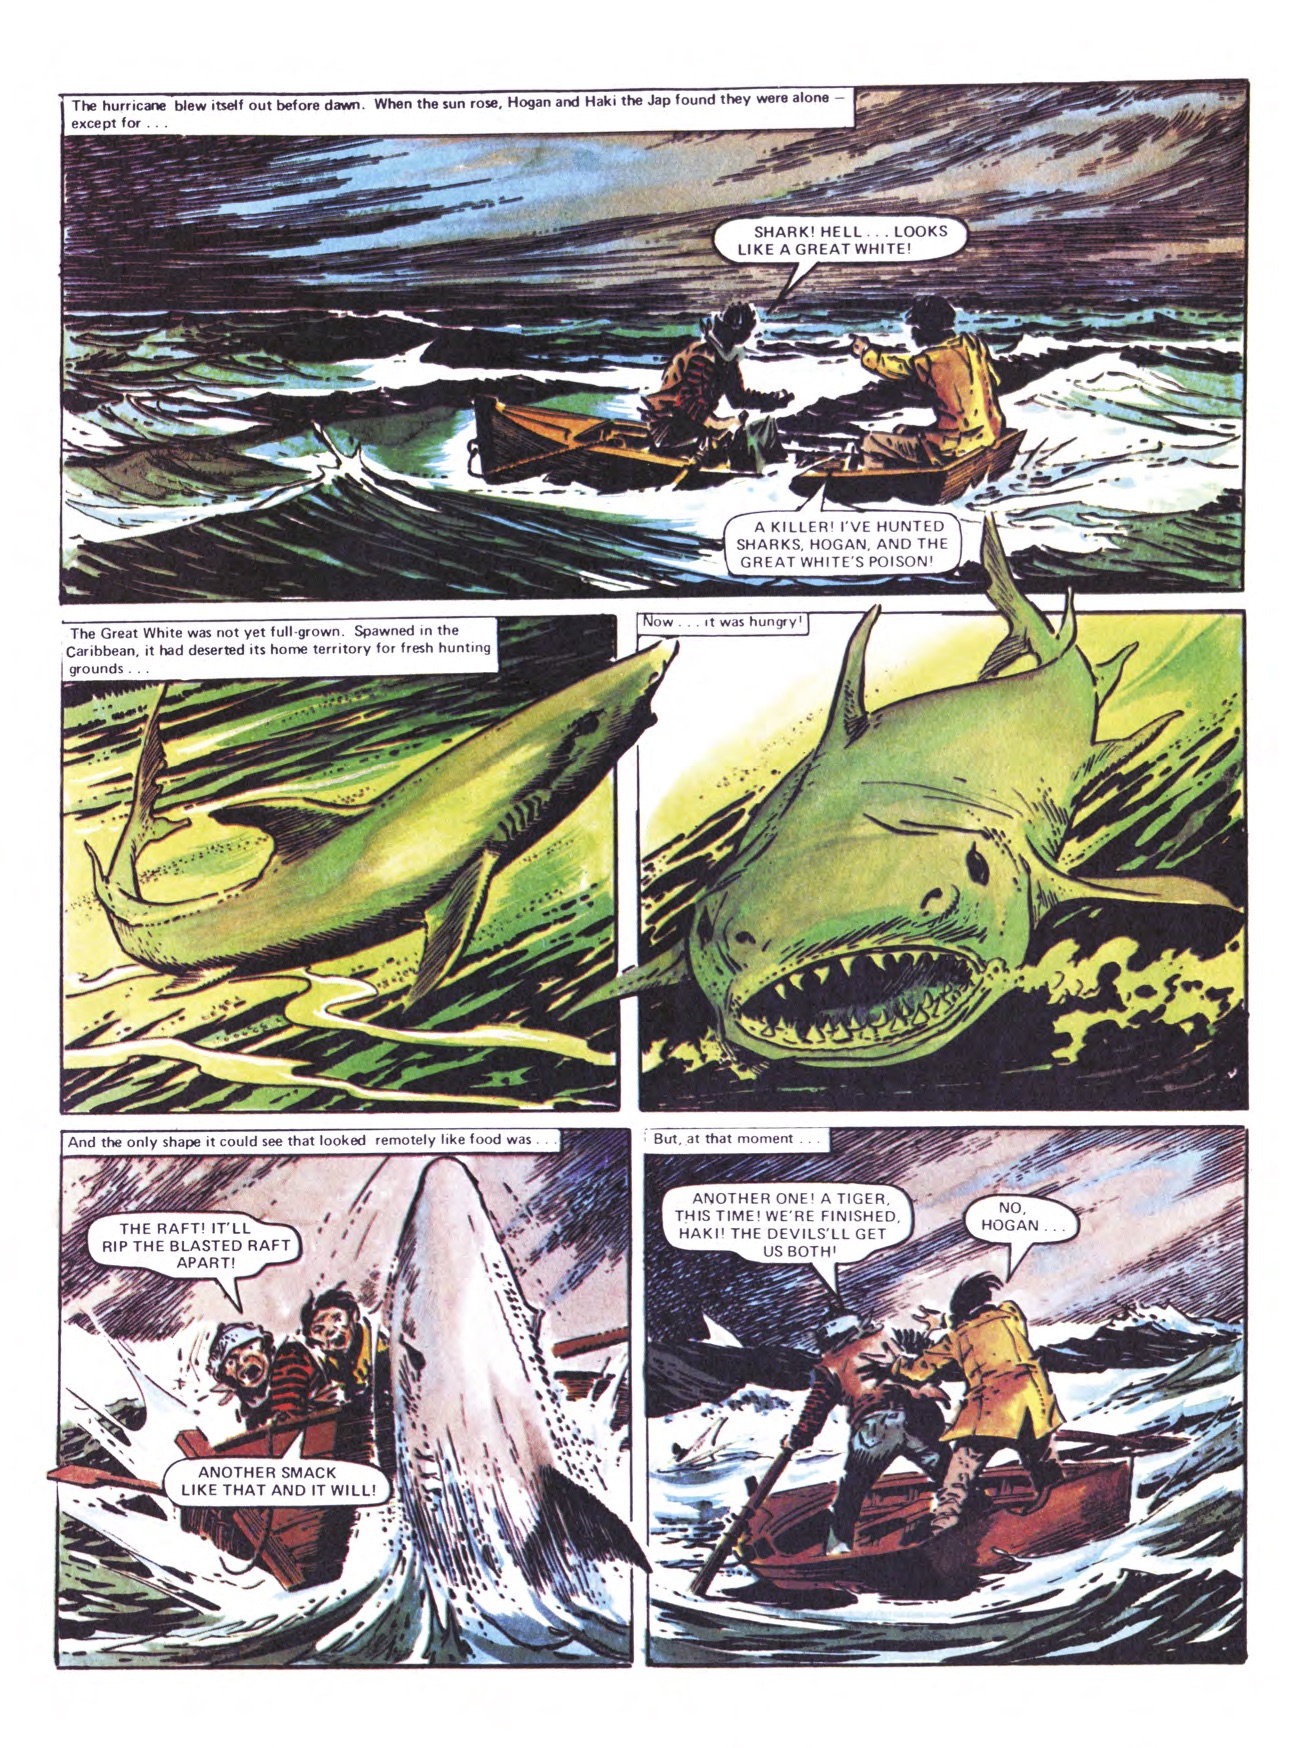 Hook_Jaw_Archive_Page 1